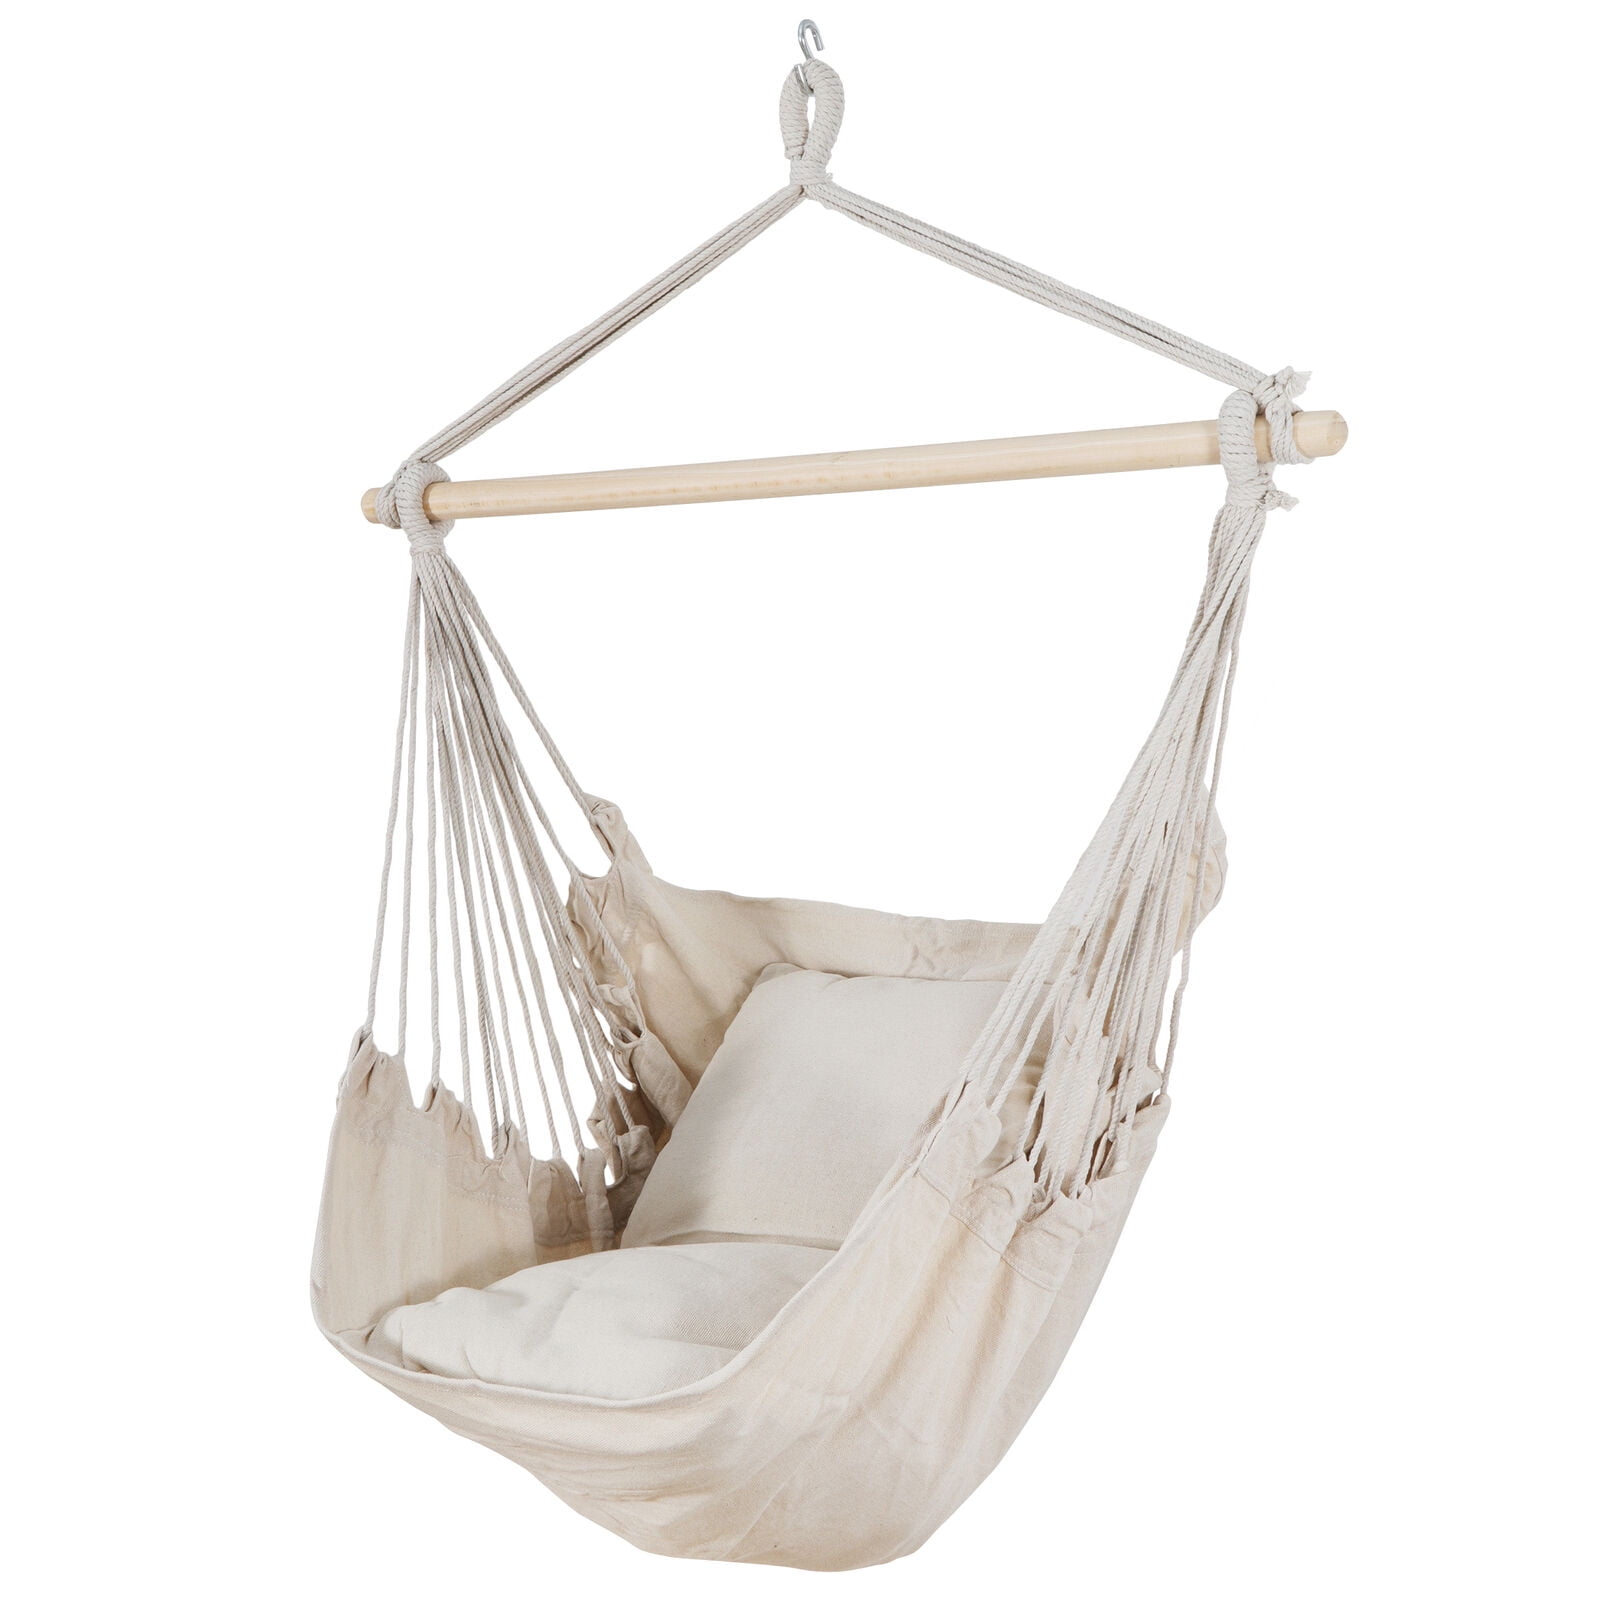 Quality Cotton Weave for Indoor or Outdoor Spaces Ankwell Hammock Chair Hanging Rope Swing Chair Beige 2 Seat Cushions Included